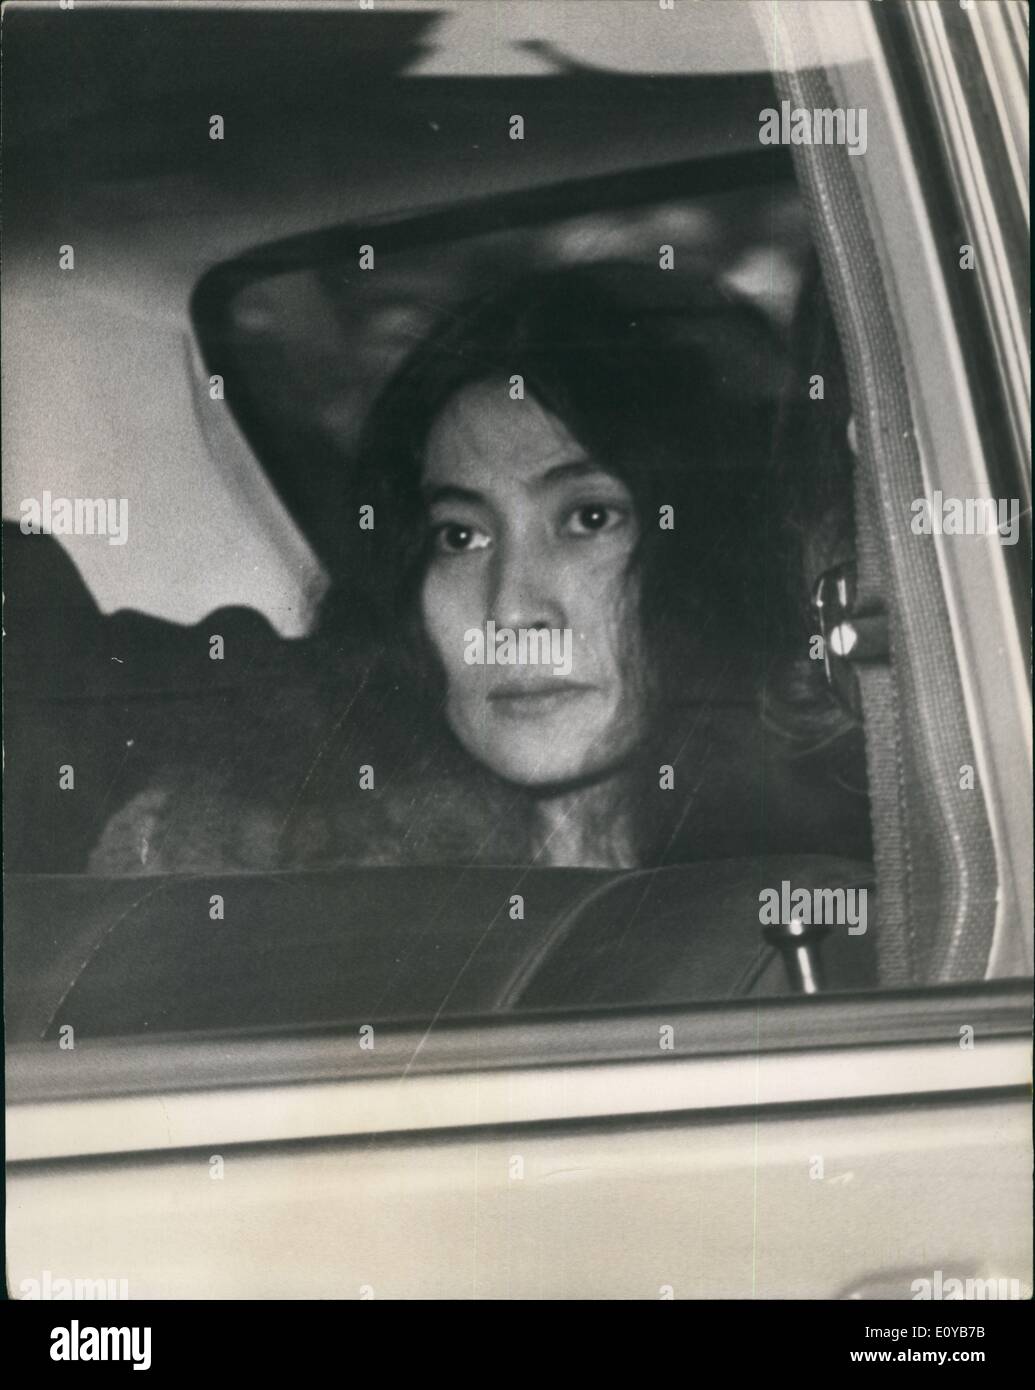 Oct. 10, 1969 - Beatle John Lennon on Drug Charge : John Lennon of the Beatles, and his friend Yoko Ono Cox, the Japanese actress were arrested by Scotland yard Burg Squad officers in London yesterday The were bath charged in two counta the illegal posssal of cannabis and obstructing police in the execution of a search warrant. They were each bailed on the sum of &pound;100 for themselves and n surety of &pound;100 and will appear at Marylebone court today. Three detectives and a police women celled at a ground floor flat in montage square, Marylebone, yesterday Stock Photo